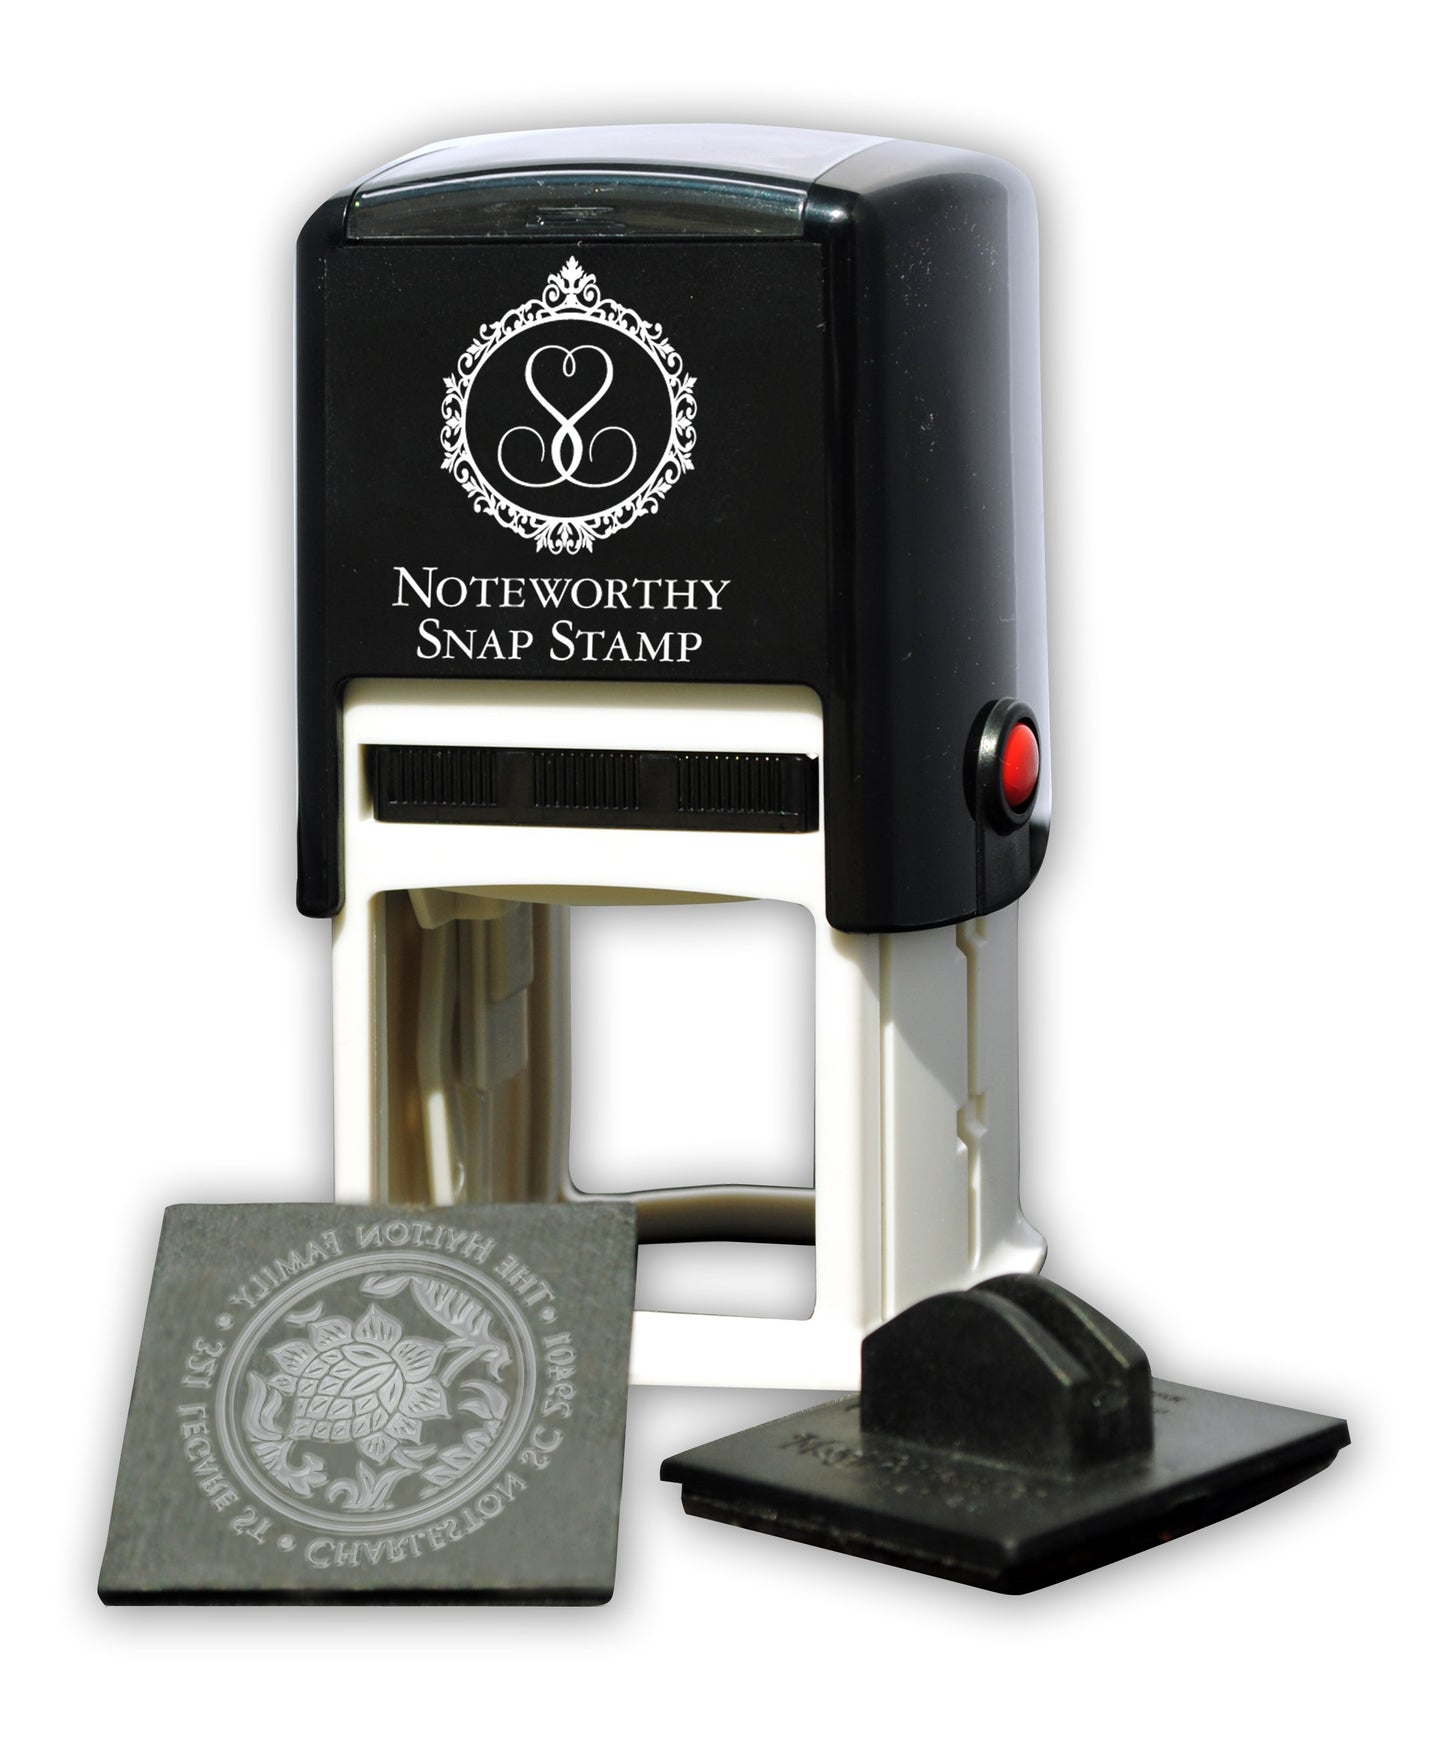 Capital of Illinois Square Stamper or Embosser